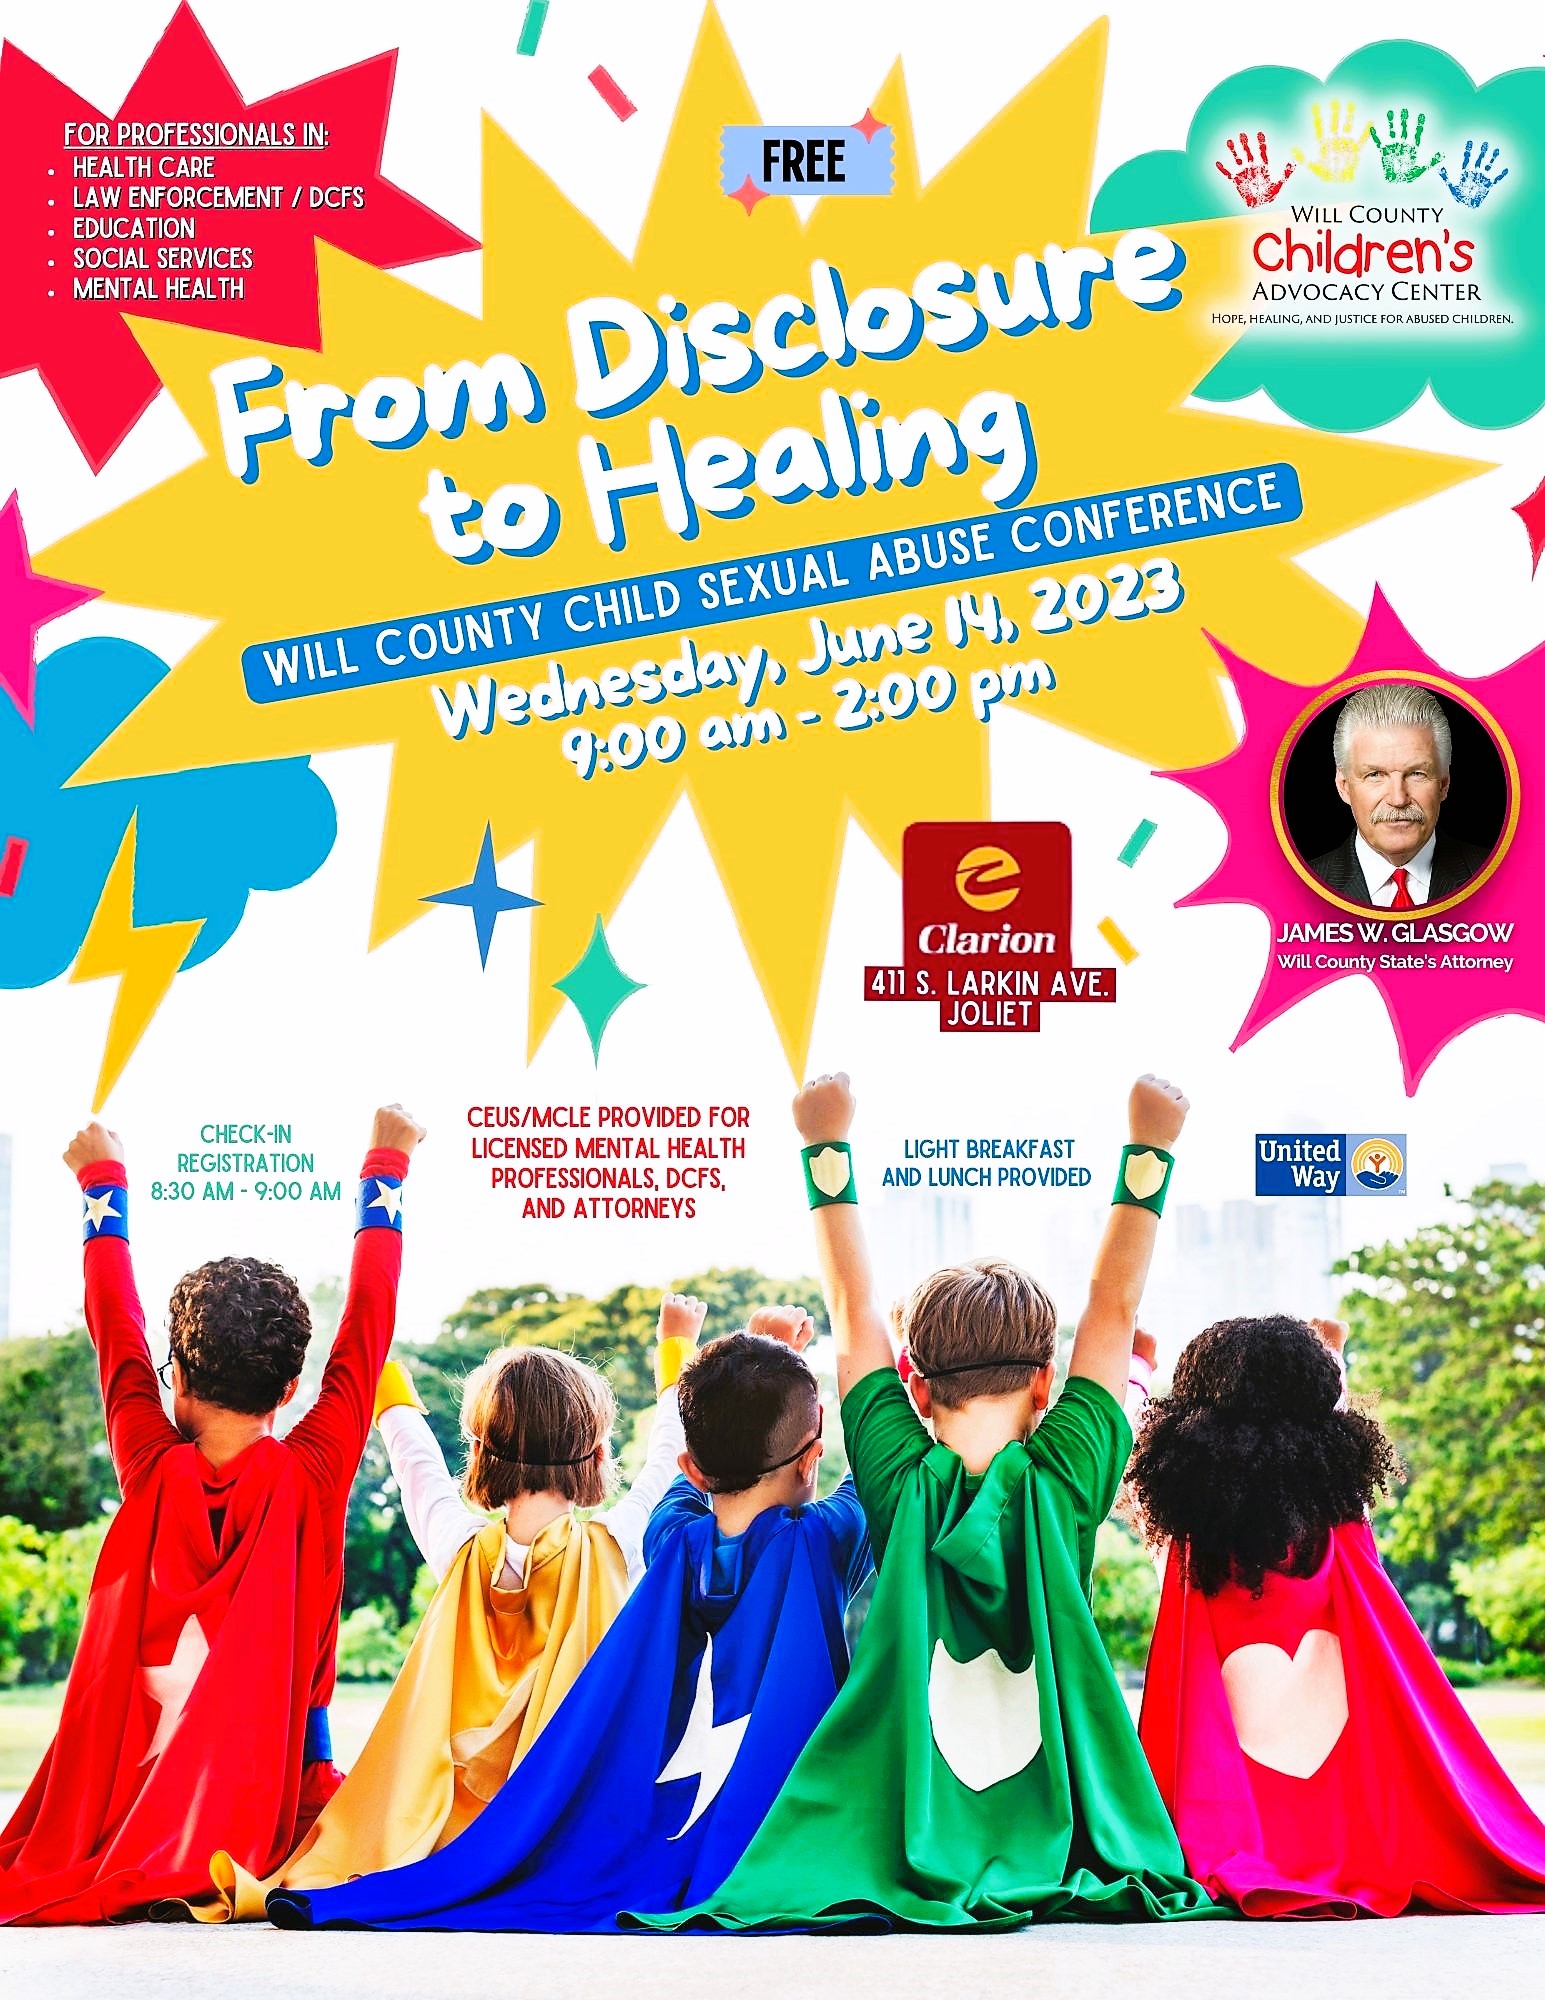 FREE 1-day Will County Child Sexual Abuse Conference for HEALTHCARE, LAW ENFORCEMENT, DCFS, EDUCATION, SOCIAL SERVICES and MENTAL HEALTH professionals! CEU/MCLE credit provided. Download flyer & registration form - https://www.willcountycac.org/wp-content/uploads/2023/05/From-Disclosure-to-Healing-2023-Fill-In-PDF-Form.pdf